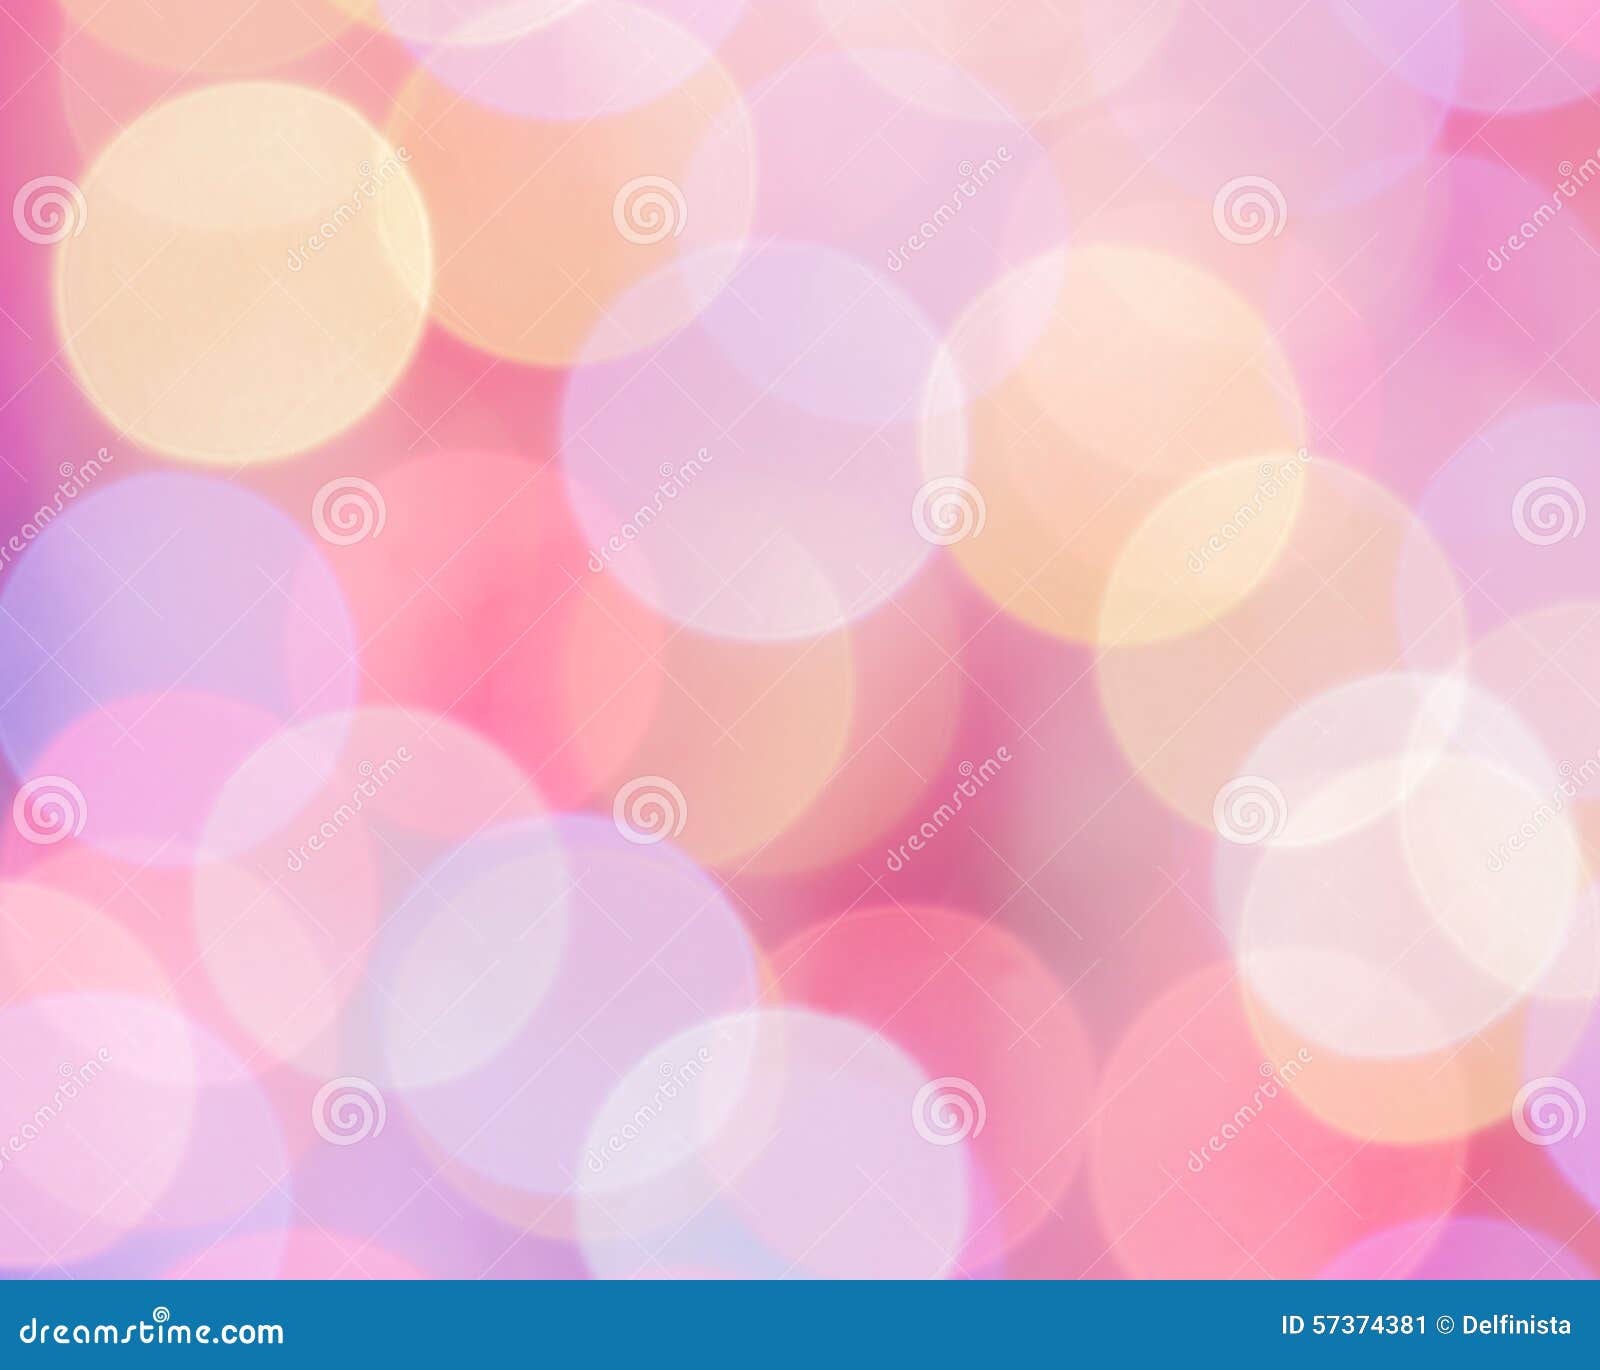 pink background : mothers day blur stock photos